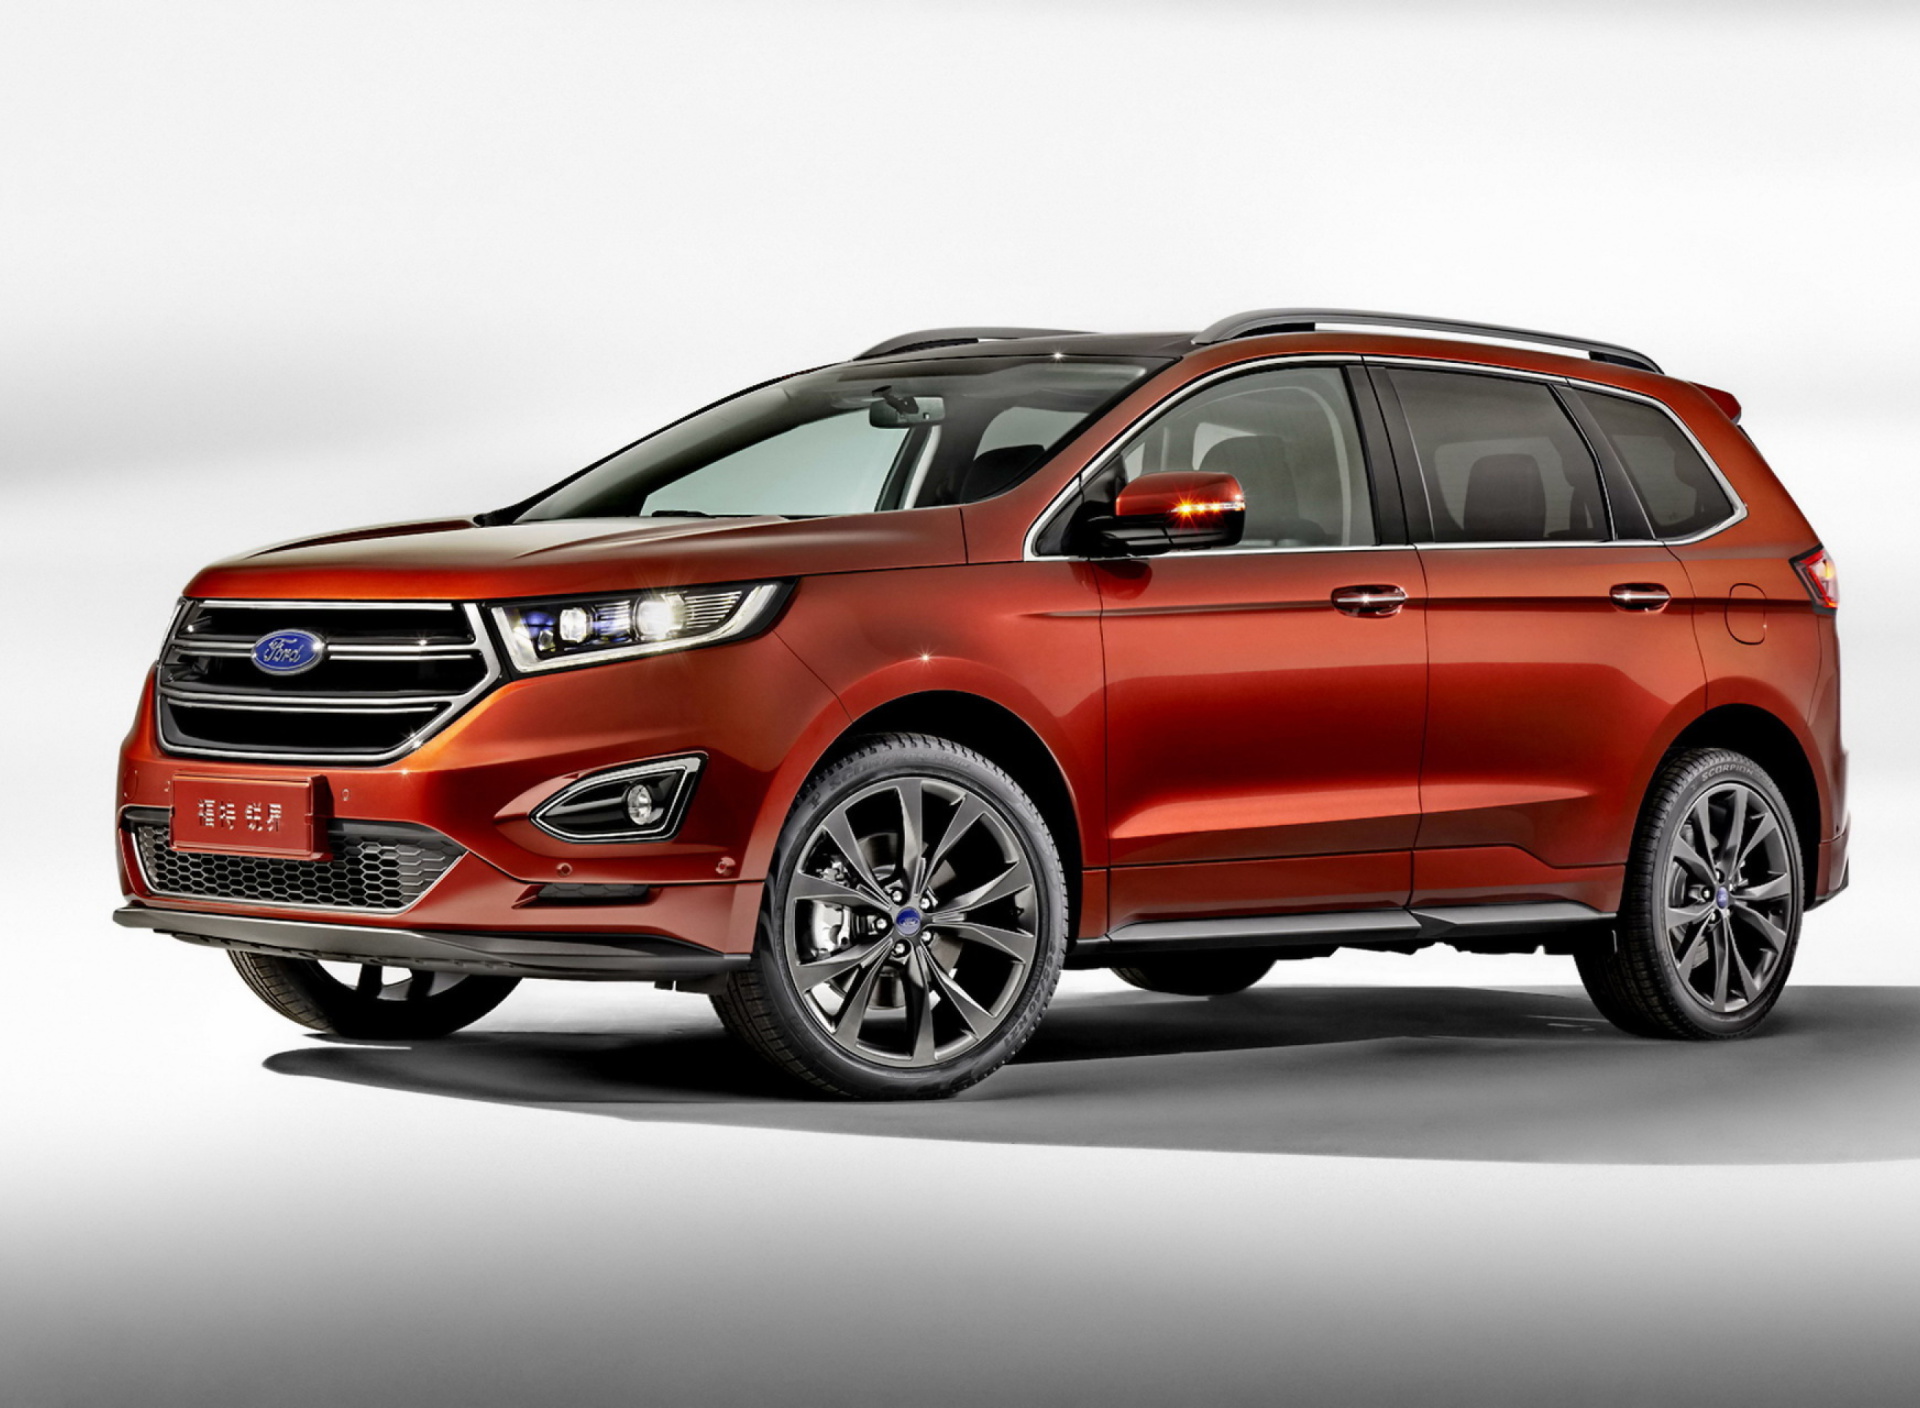 2014 Ford Edge Crossover wallpaper 1920x1408